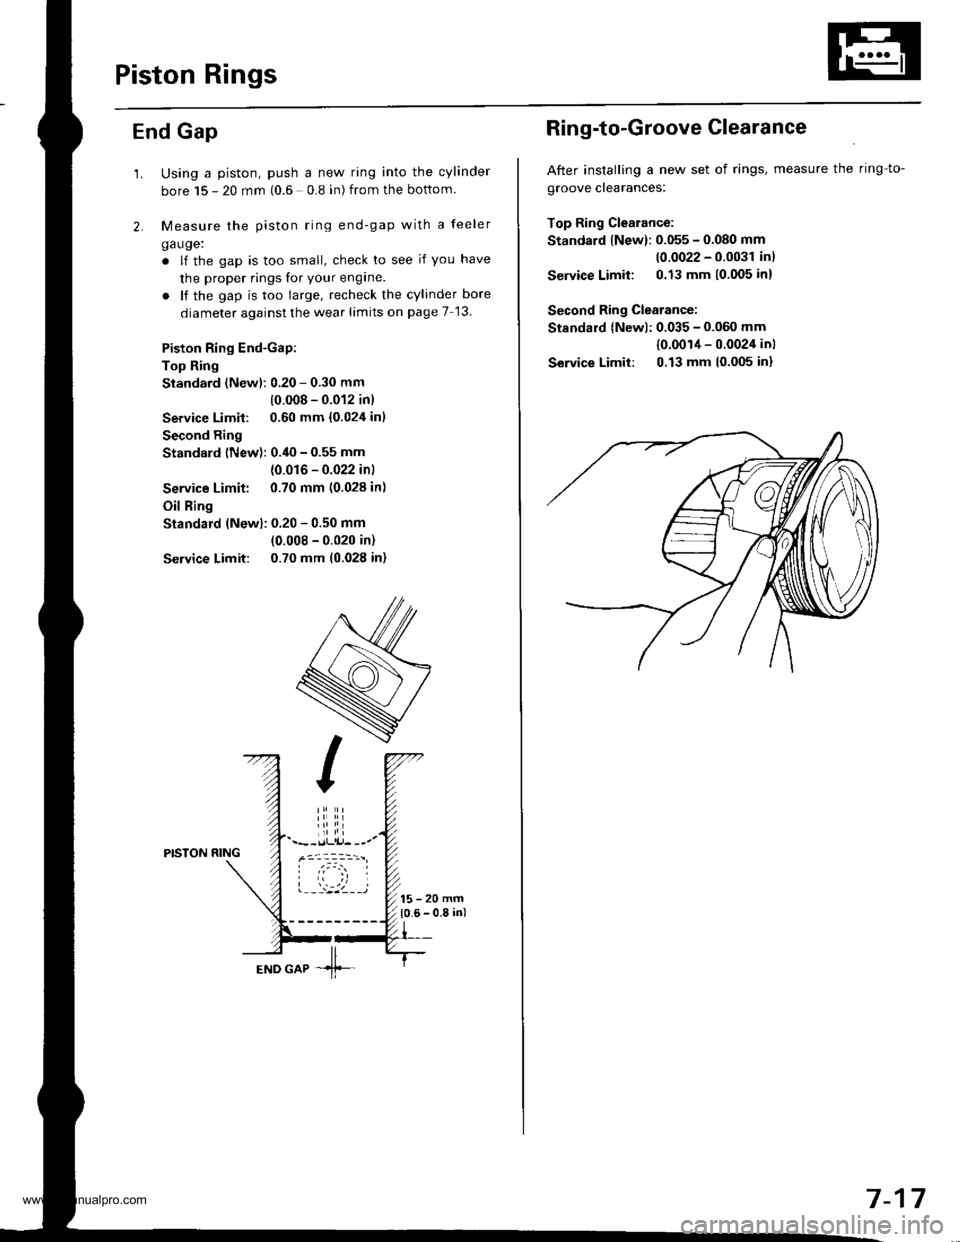 HONDA CR-V 1999 RD1-RD3 / 1.G Workshop Manual 
Piston Rings
End Gap
2.
1.Using a piston, push a new ring into the cylinder
bore 15 - 20 mm (0.6 0.8 in) from the bottom
Measure the piston ring end-gap with a feeler
ga uge:
. lf the gap is too smal